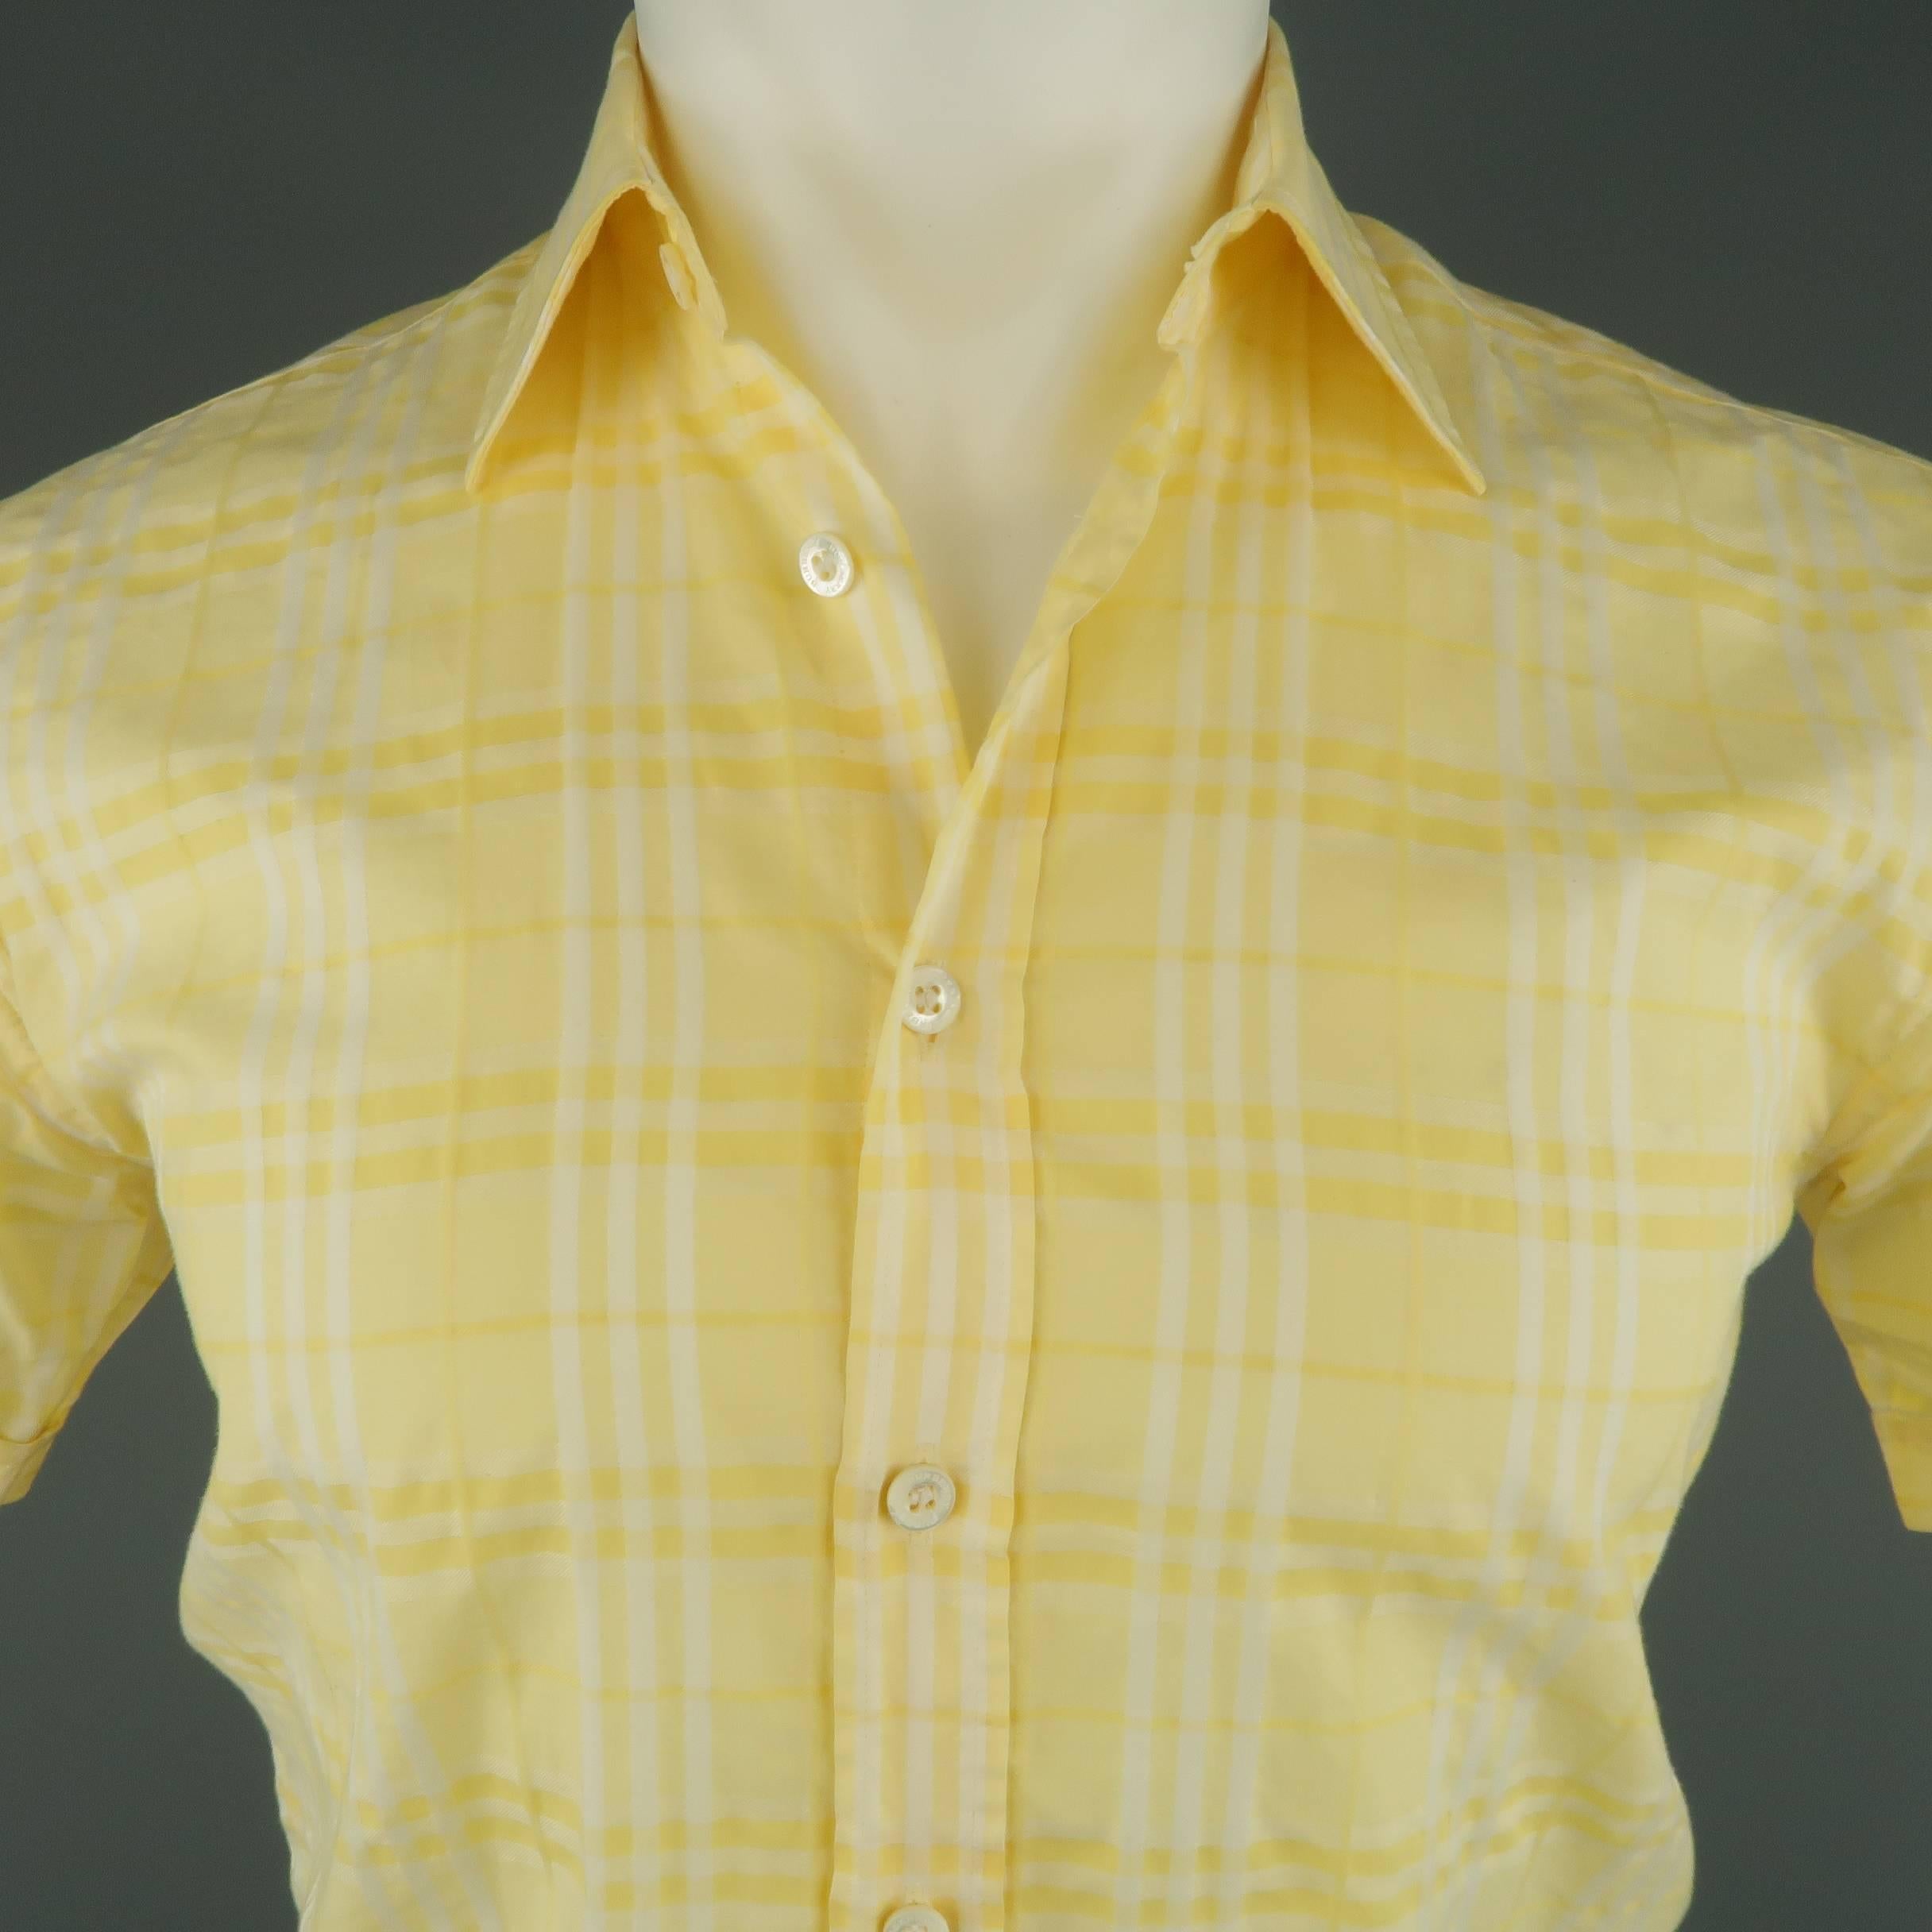 BURBERRY LONDON cotton button up shirt features classic Burberry plaid print in various faint hues of yellow.
 
Good Pre-Owned Condition.
Marked: XS
 
Measurements:
 
Shoulder: 17.5 in.
Chest: 40 in.
Sleeve: 8 in.
Length: 30 in.
